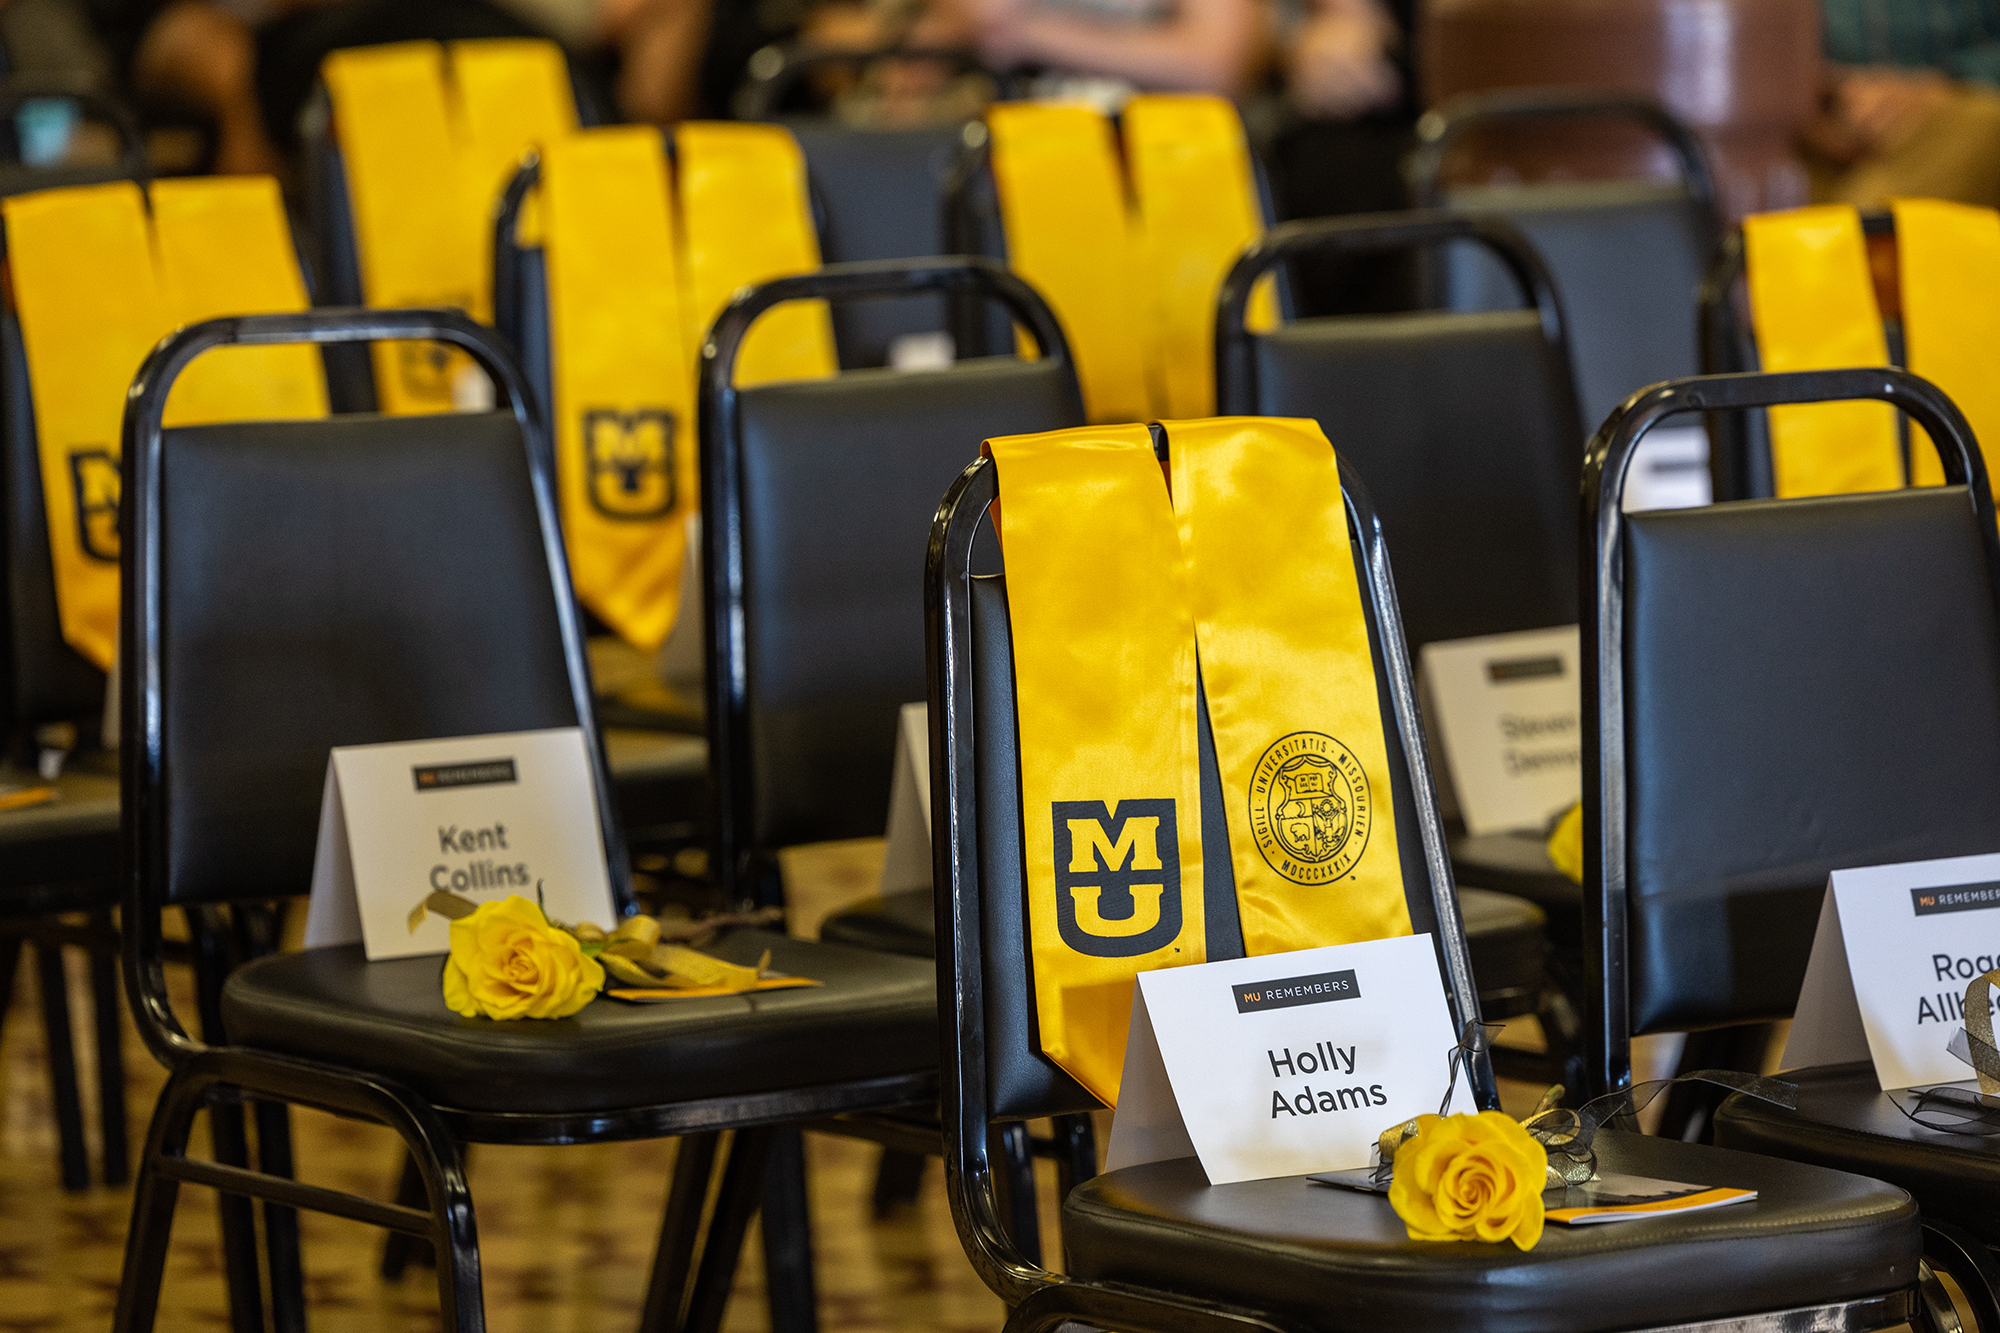 empty chairs with yellow roses on them. some have yellow stoles as well